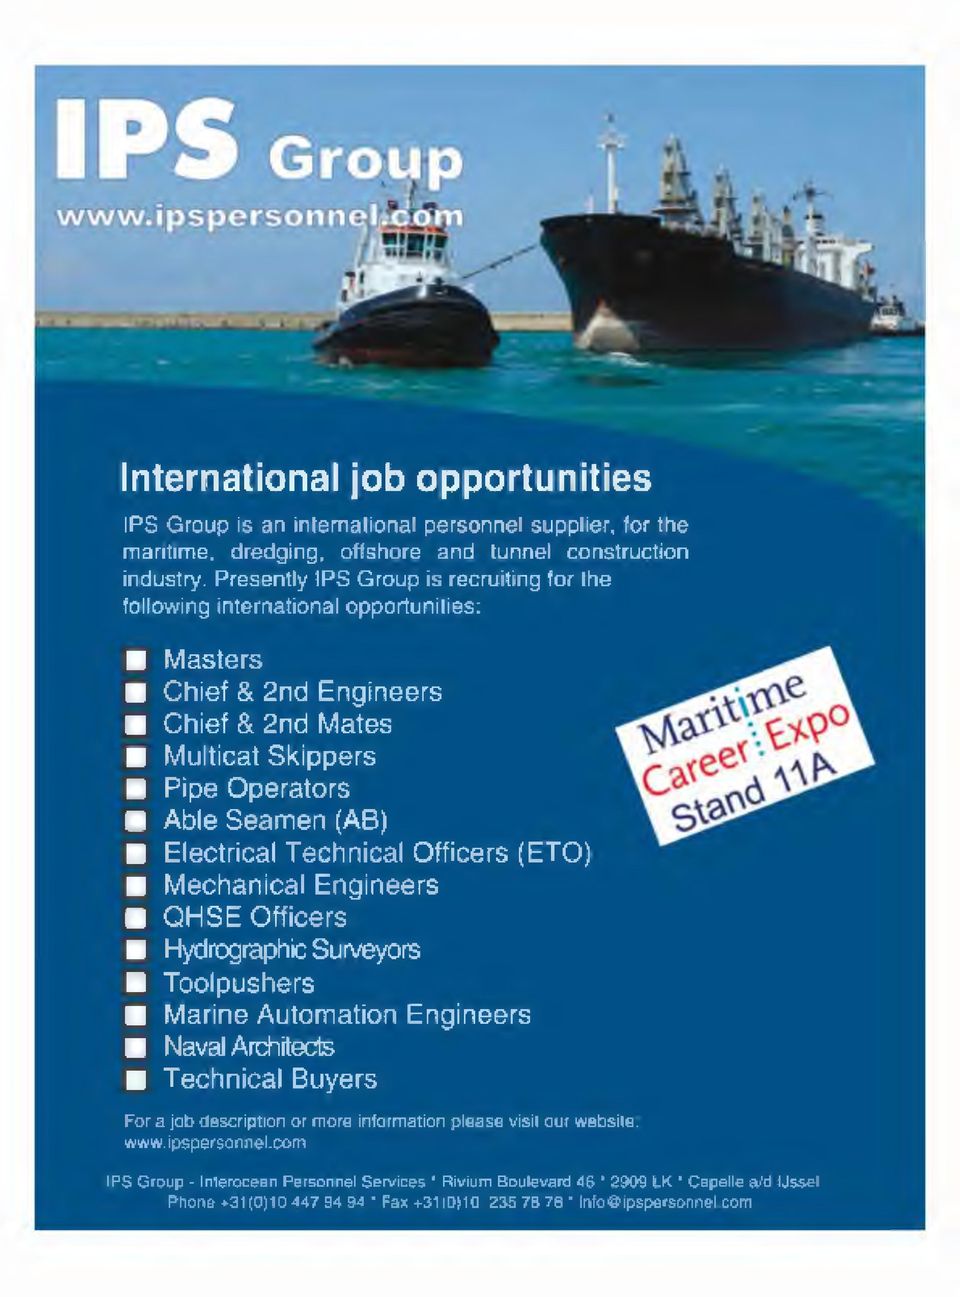 Electrical Technical Officers (ETO) Mechanical Engineers Q H S E Officers Hydrographic Surveyors Toolpushers Marine Automation Engineers Naval Architects Technical Buyers For a job description